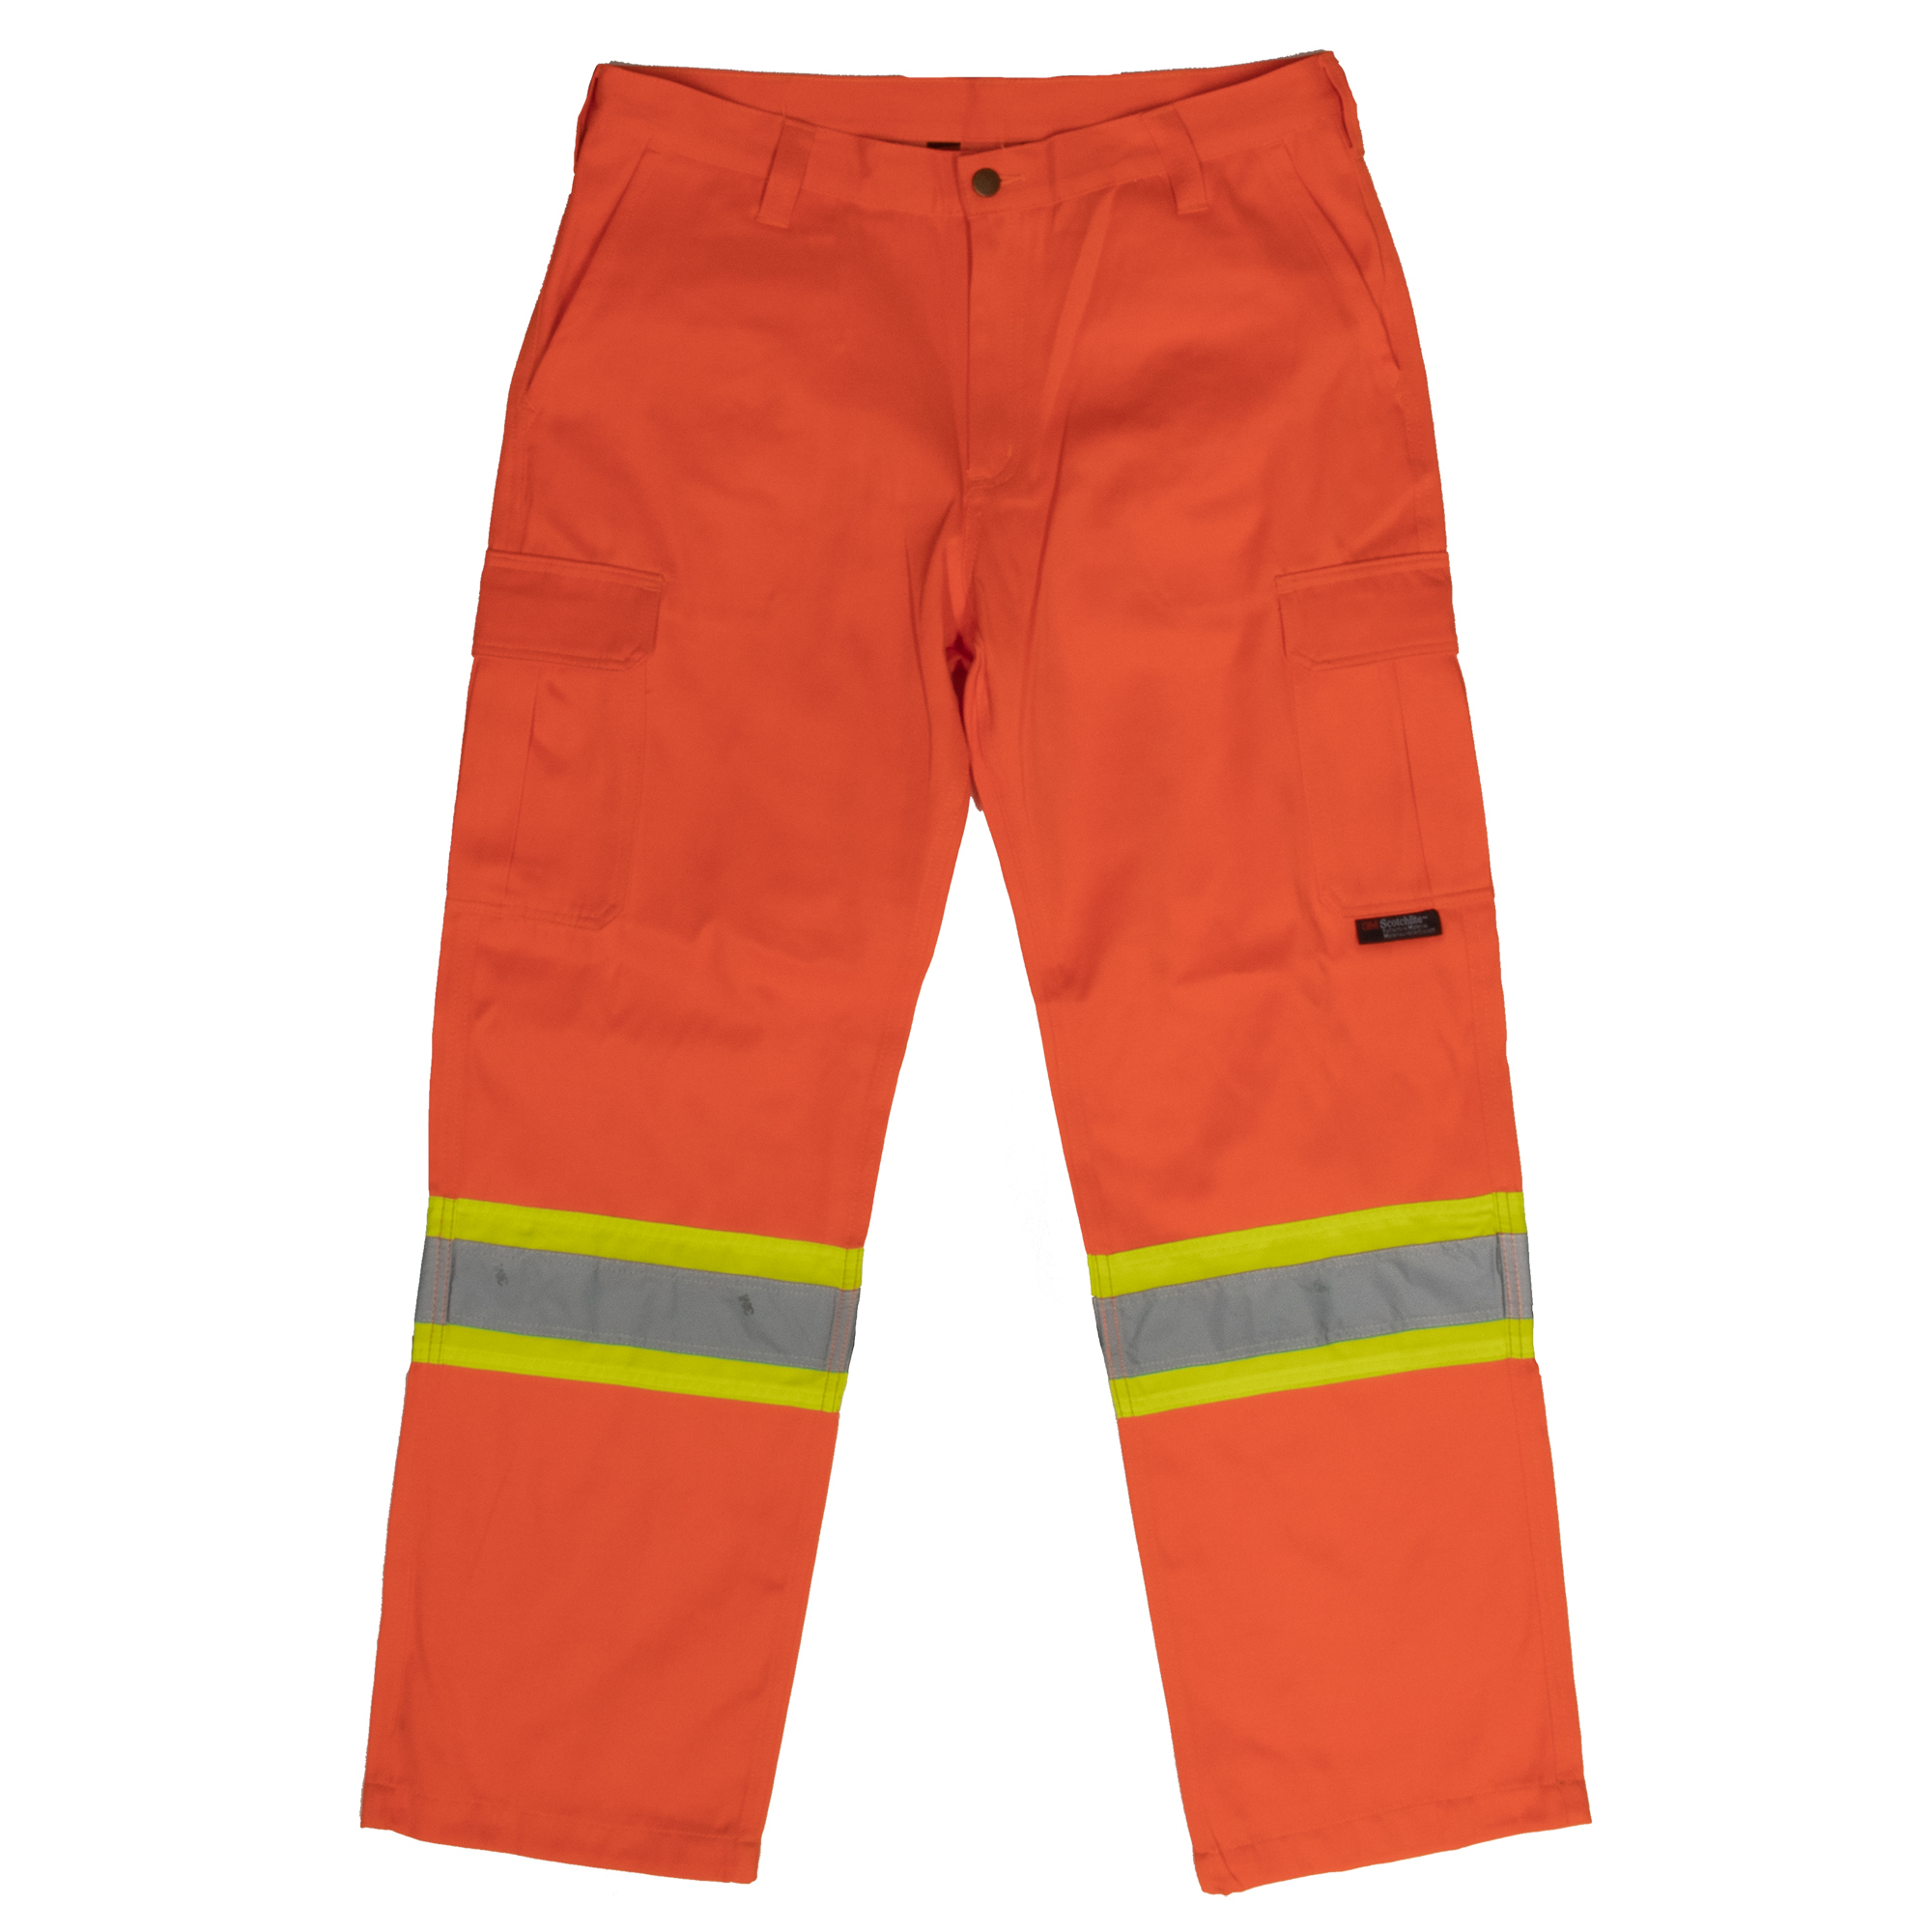 Tough Duck, Safety Cargo Work Pant, Waist 34 in, Inseam 34 in, Color Fluorescent Orange, Model SP013